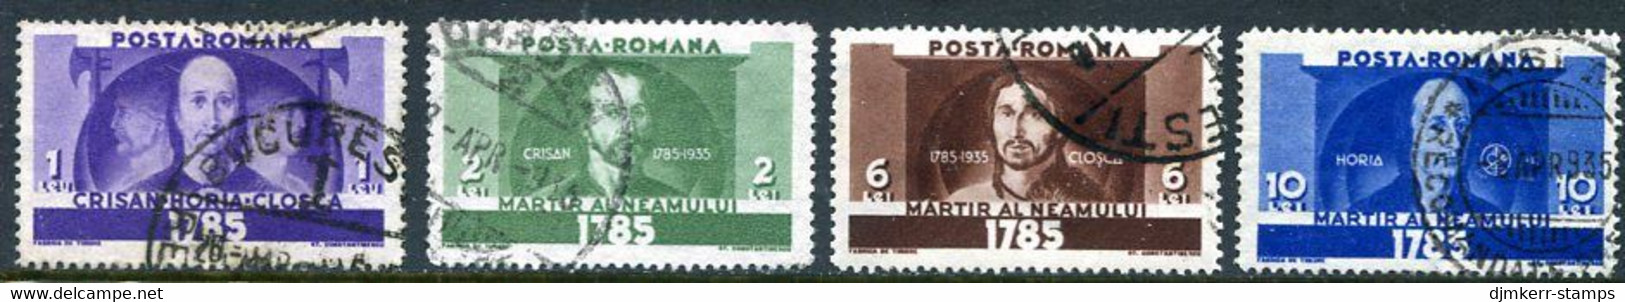 ROMANIA 1935 150th Anniversary Of Transylvanian Rising  Used.  Michel 480-83 - Used Stamps